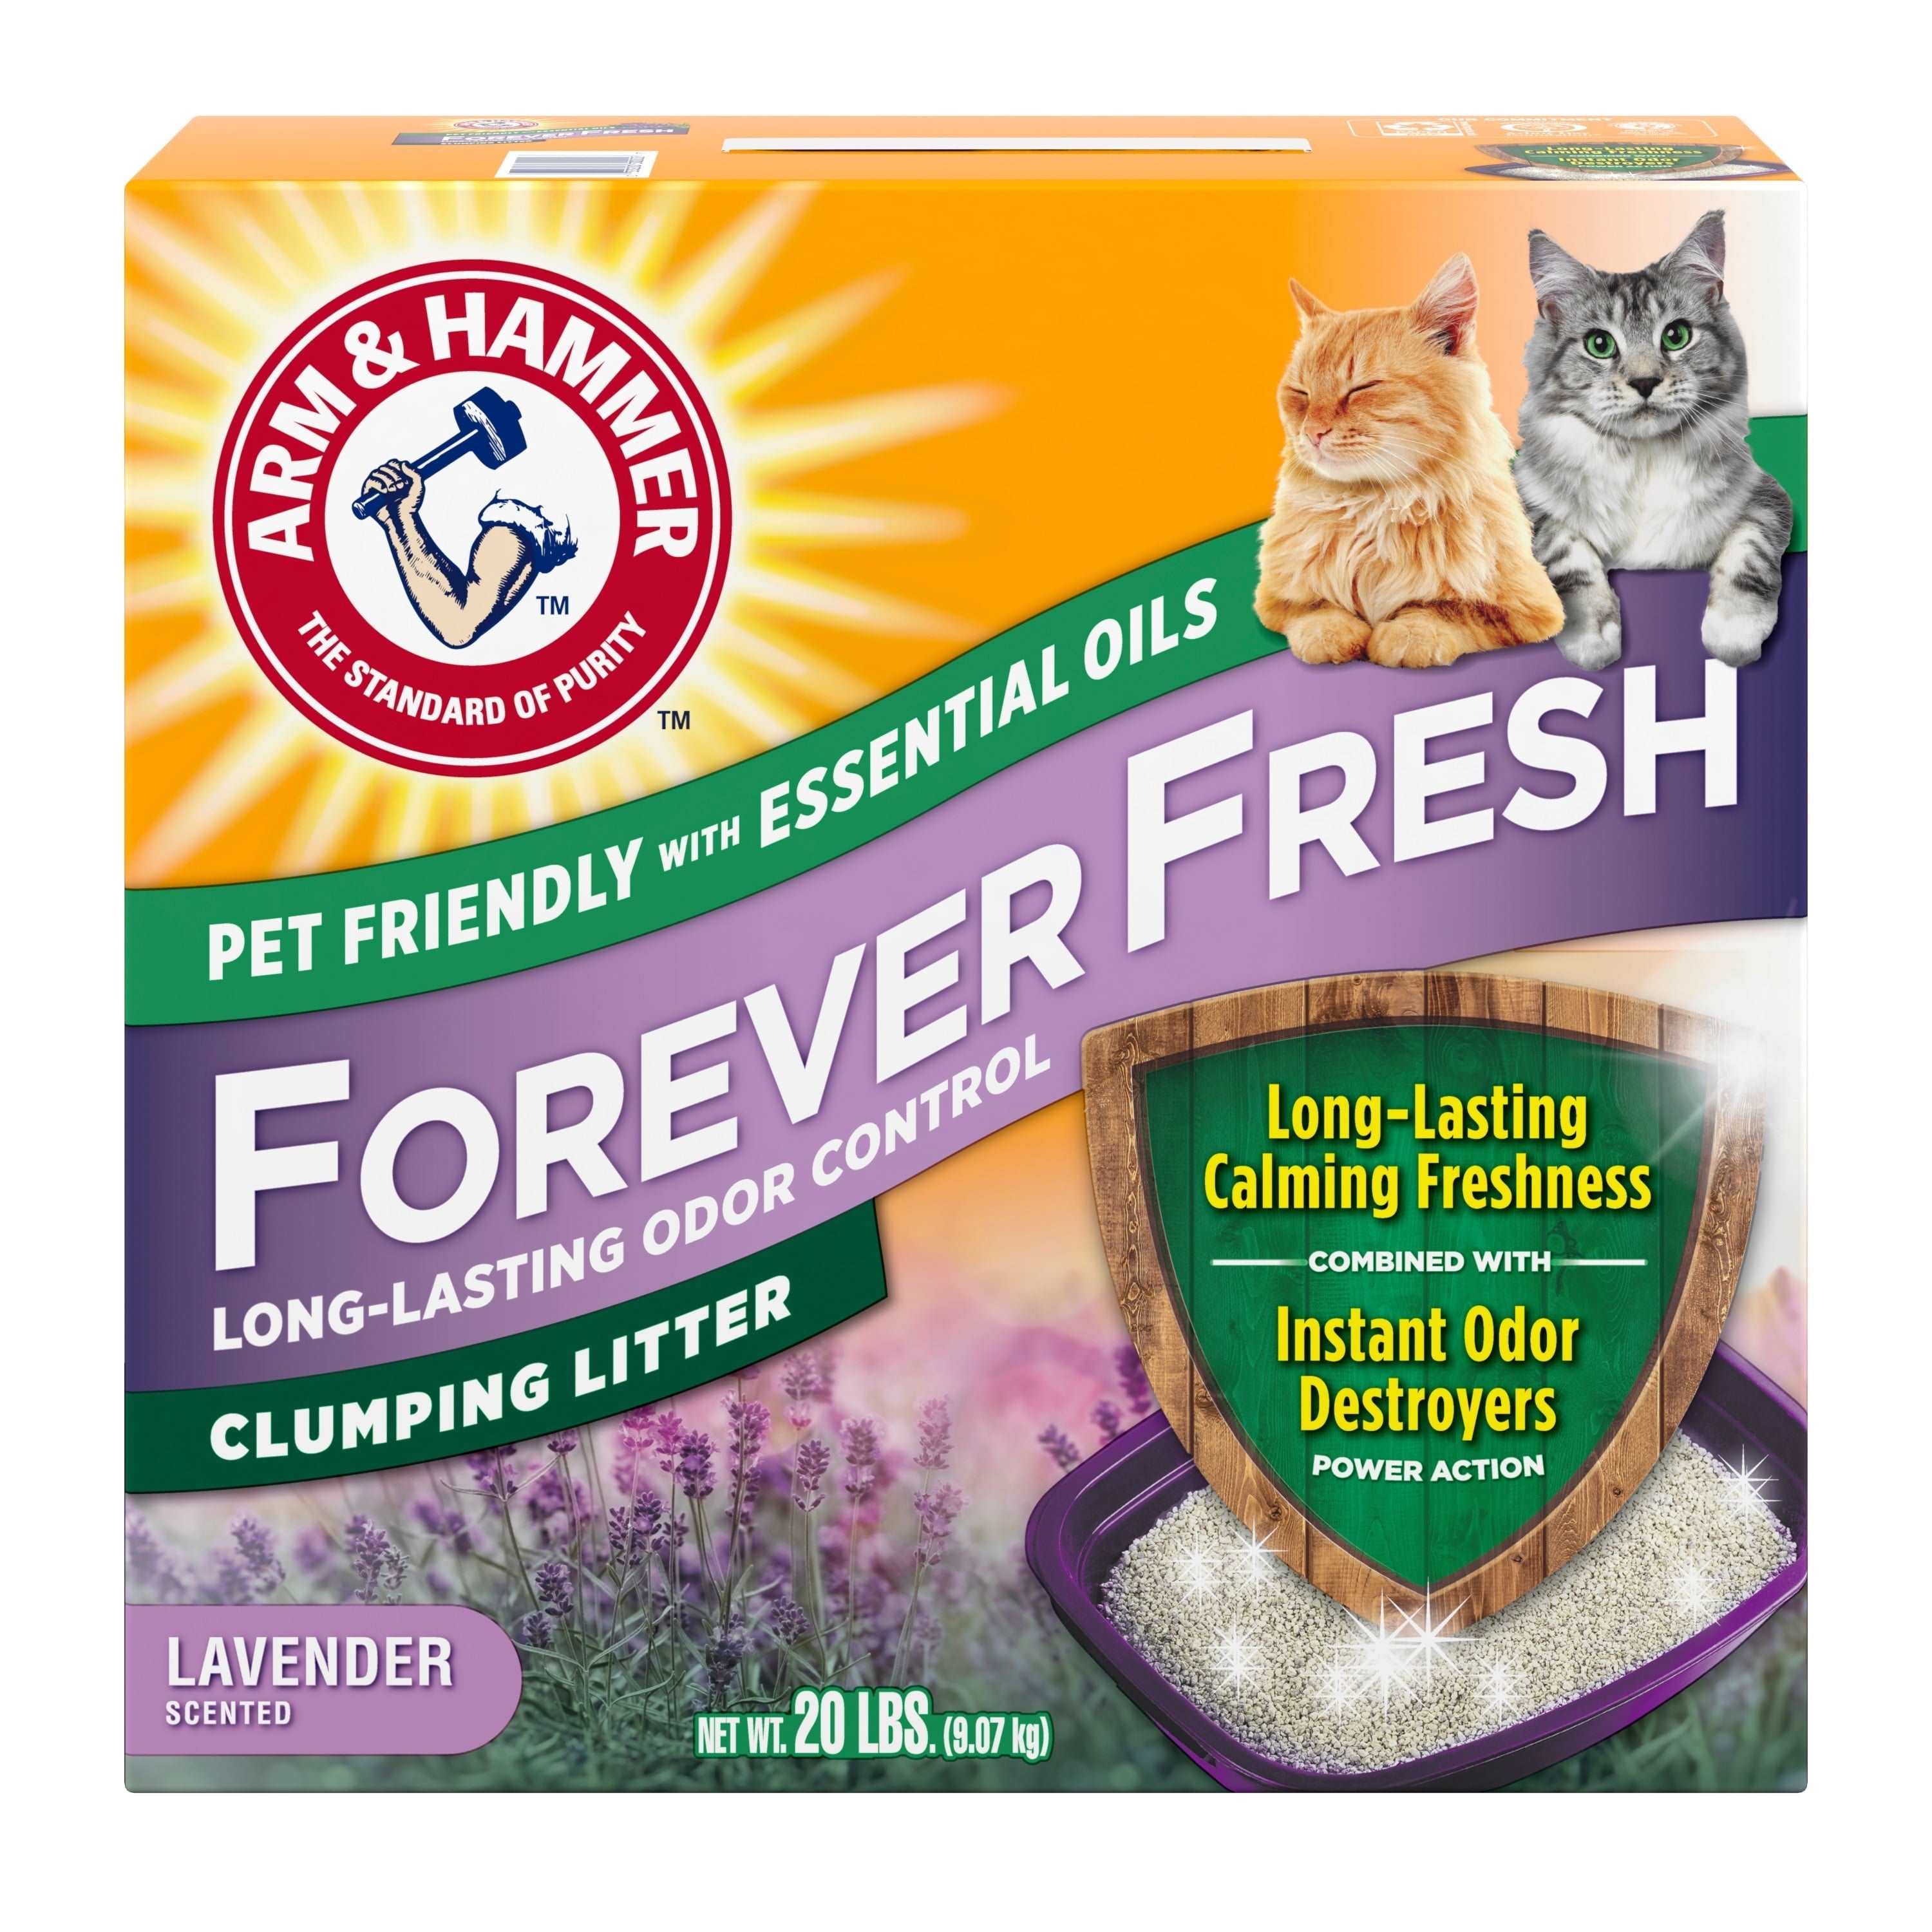 Wholesale prices with free shipping all over United States Arm & Hammer Forever Fresh Clumping Cat Litter Lavender, MultiCat 20lb, Pet Friendly with Essential Oils - Steven Deals